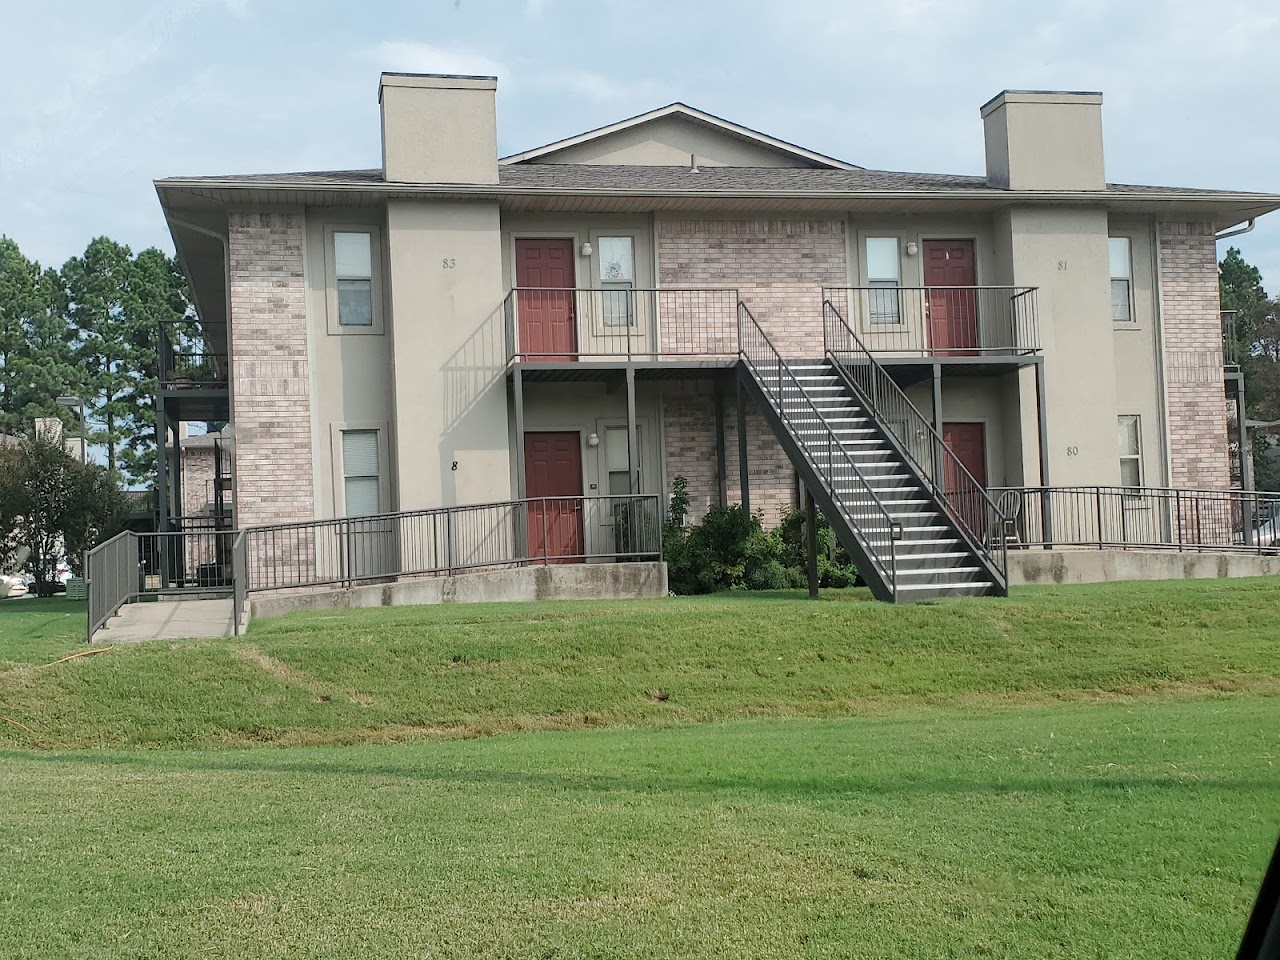 Photo of WOODLAND STATION APARTMENTS FKA CABOT APTS. Affordable housing located at 38-44 SHANE DR CABOT, AR 72023